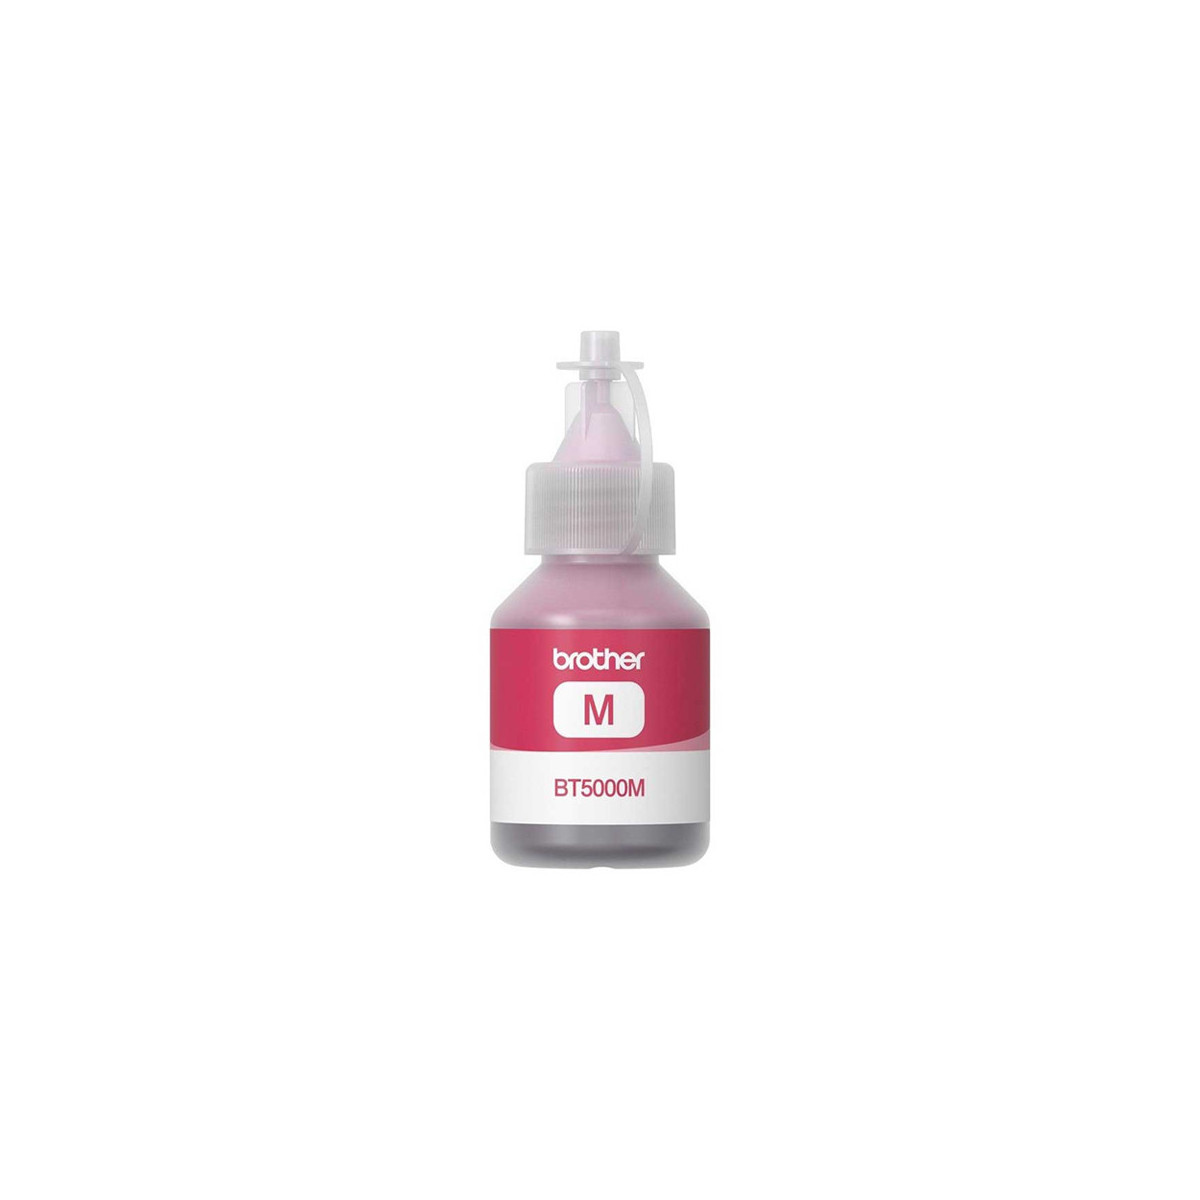 BOUTEILLE D'ENCRE ADAPTABLE BROTHER BT5000M - 100ML - MAGENTA